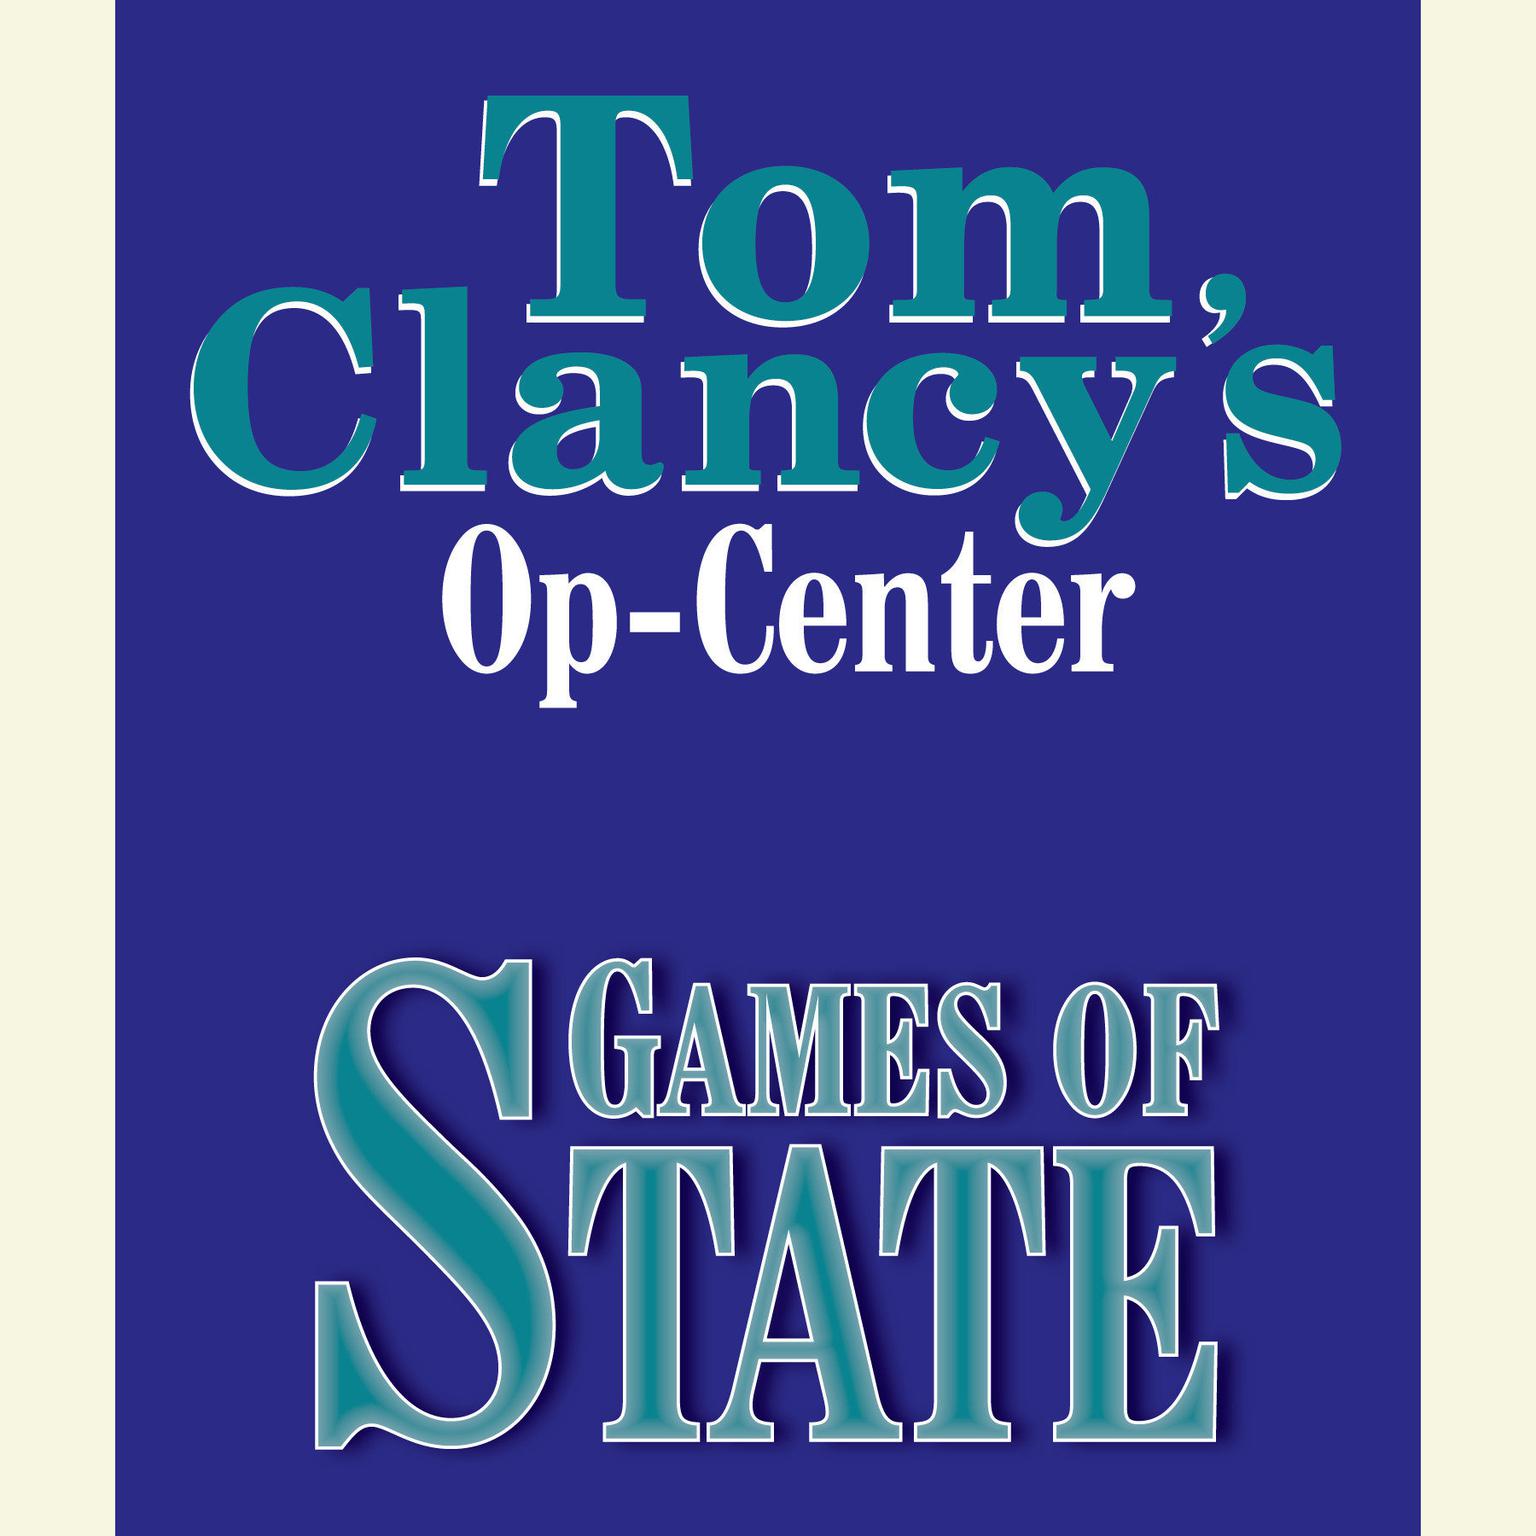 Tom Clancys Op-Center #3: Games of State Audiobook, by Tom Clancy